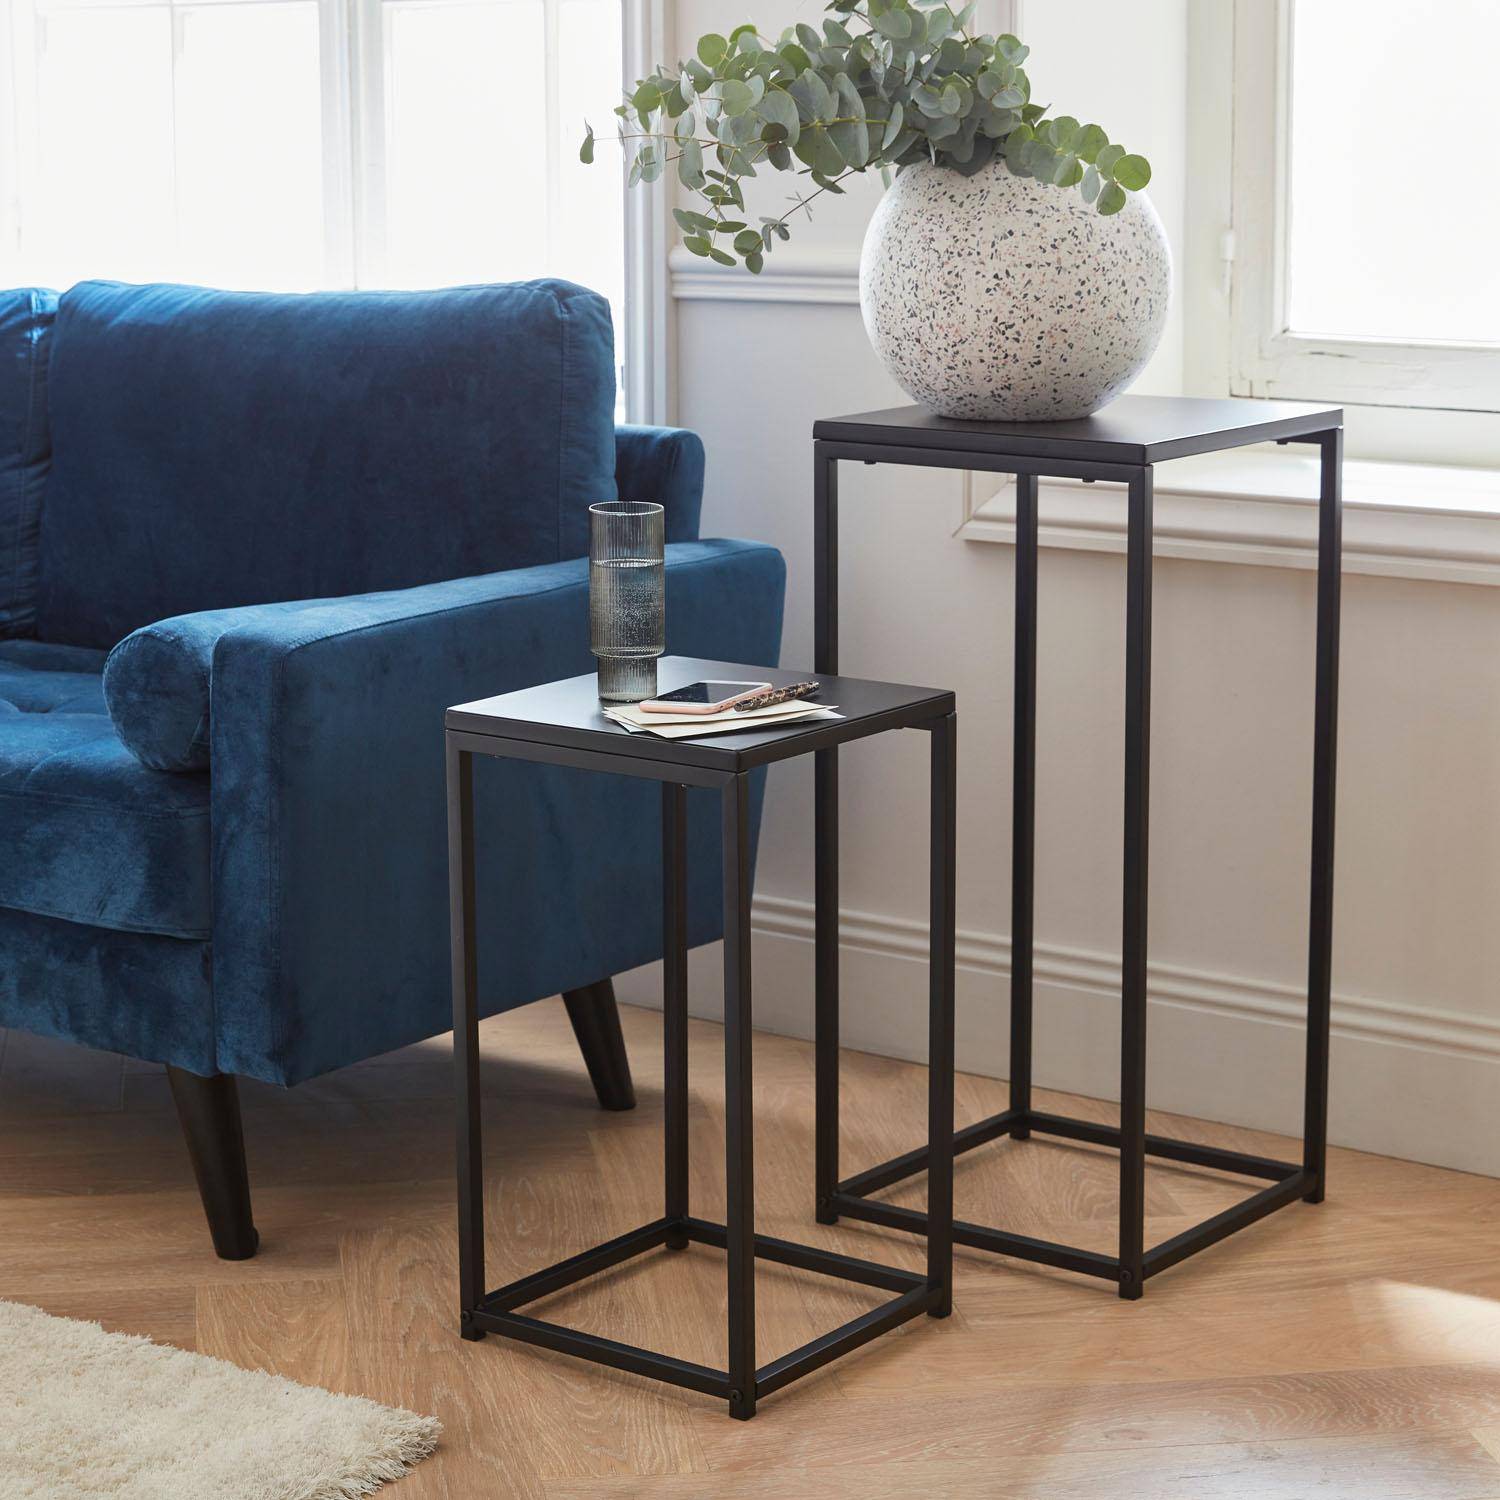 Set of 2 side tables/ end of sofa , Industrielle, Black Photo1